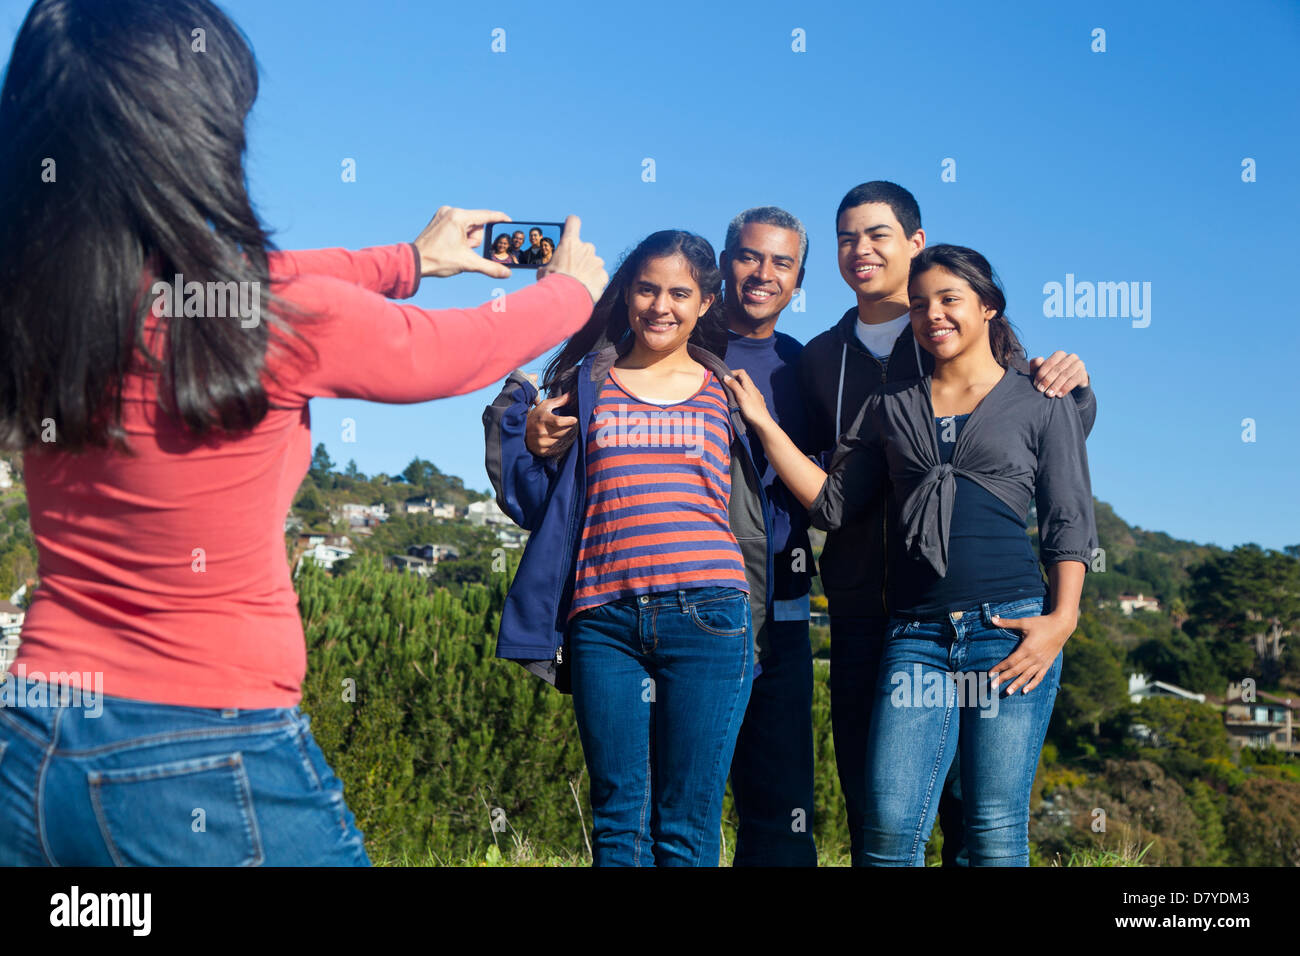 Hispanic family taking photo in park Banque D'Images